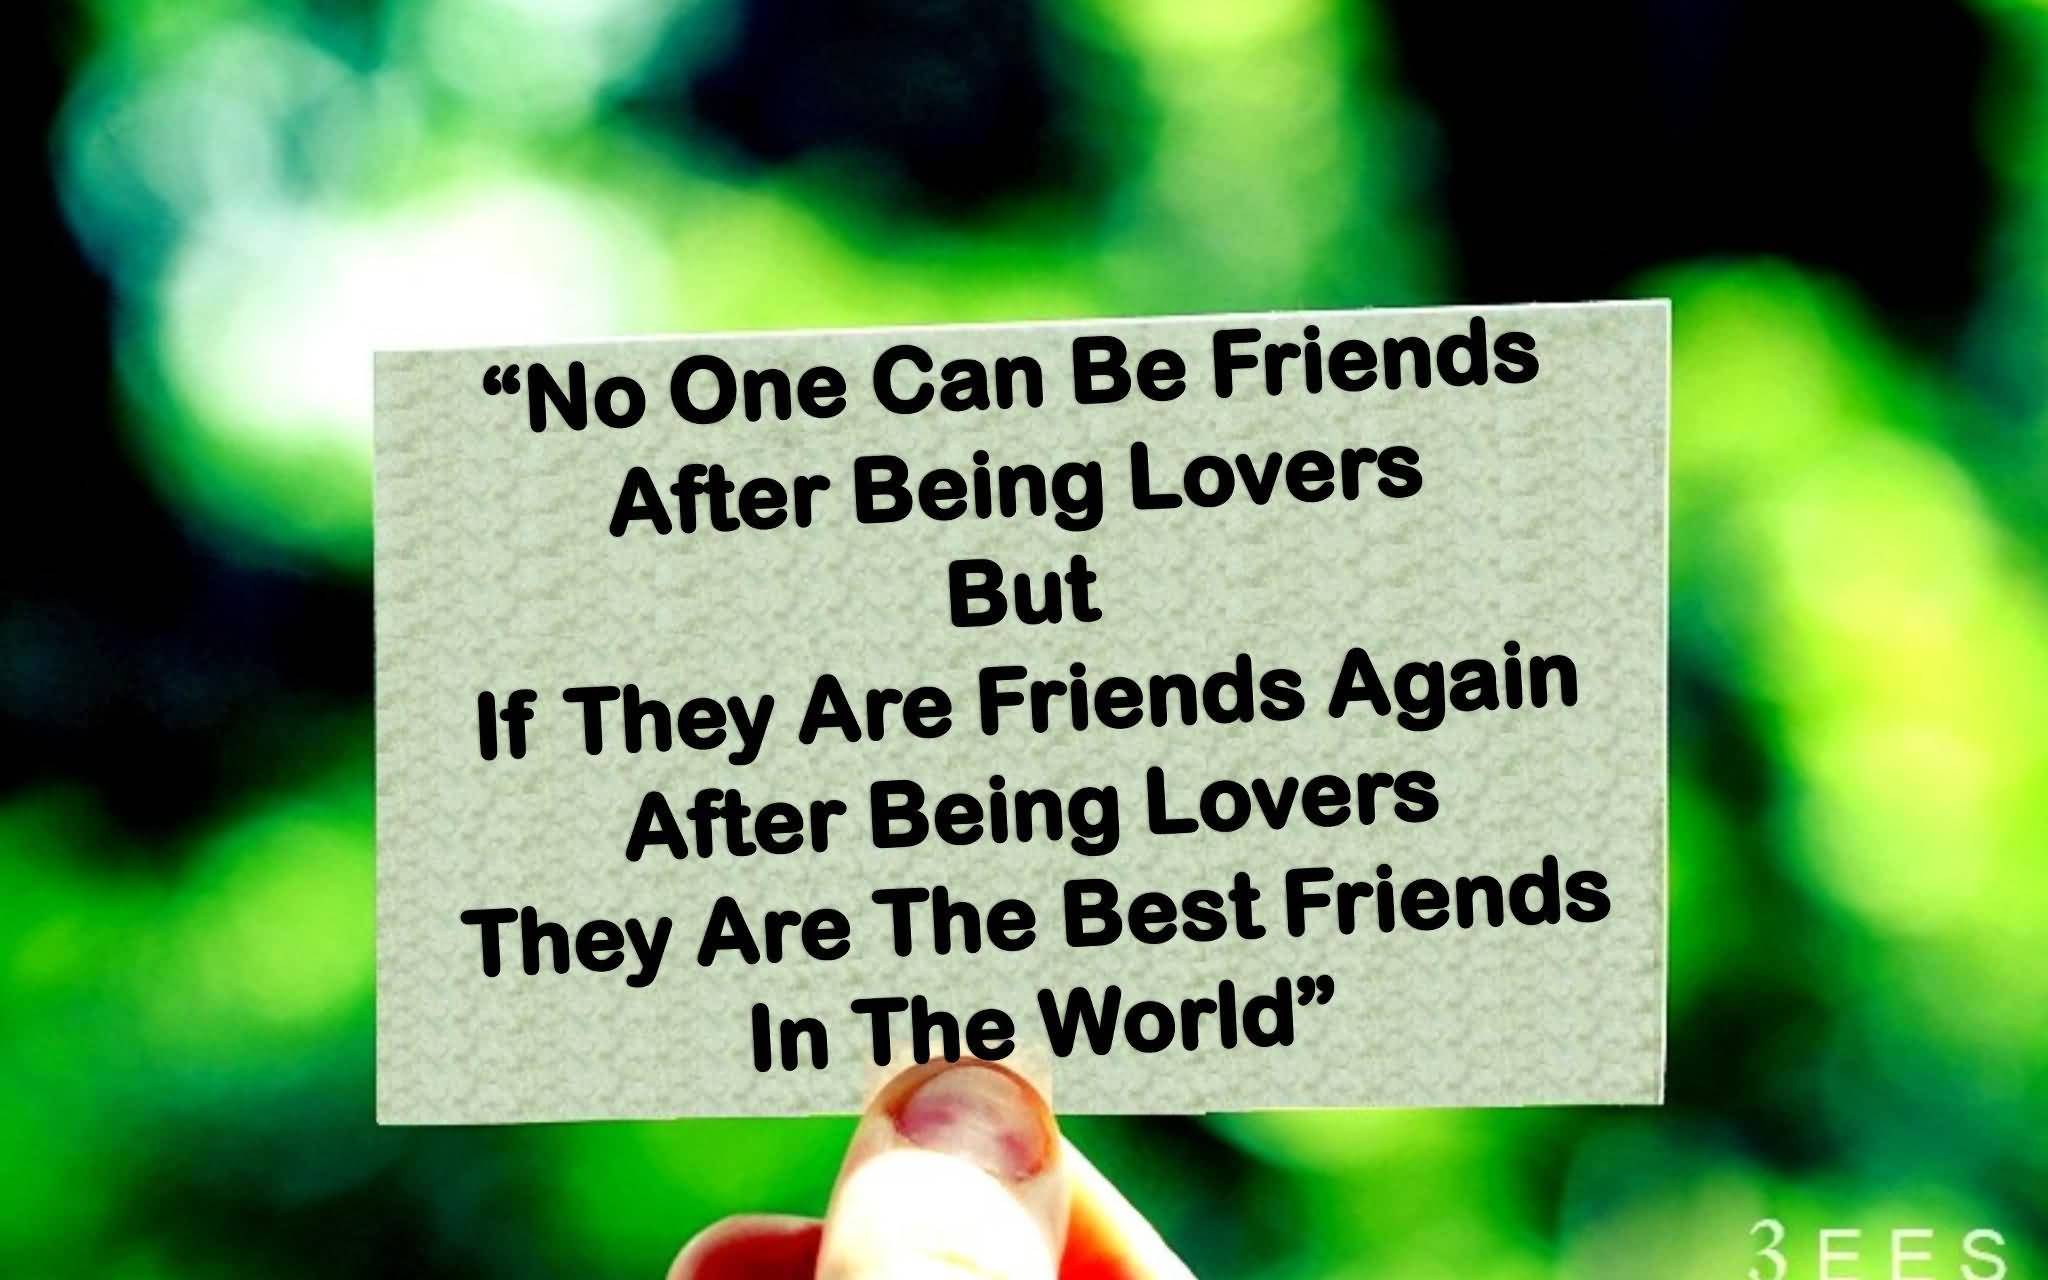 Quotes About Friendship With Images 10